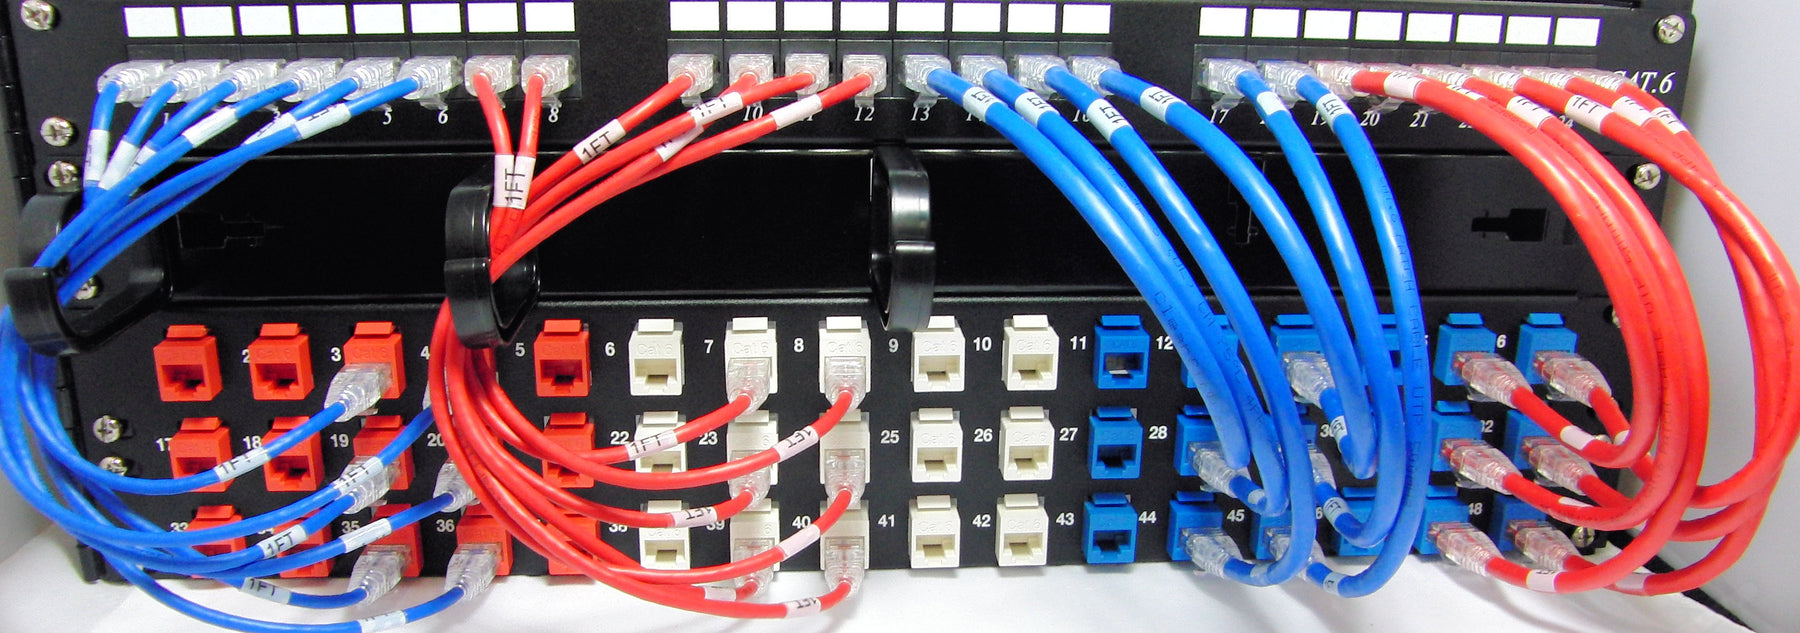 Ethernet Patch Cables Plugged Into a Patch Panel